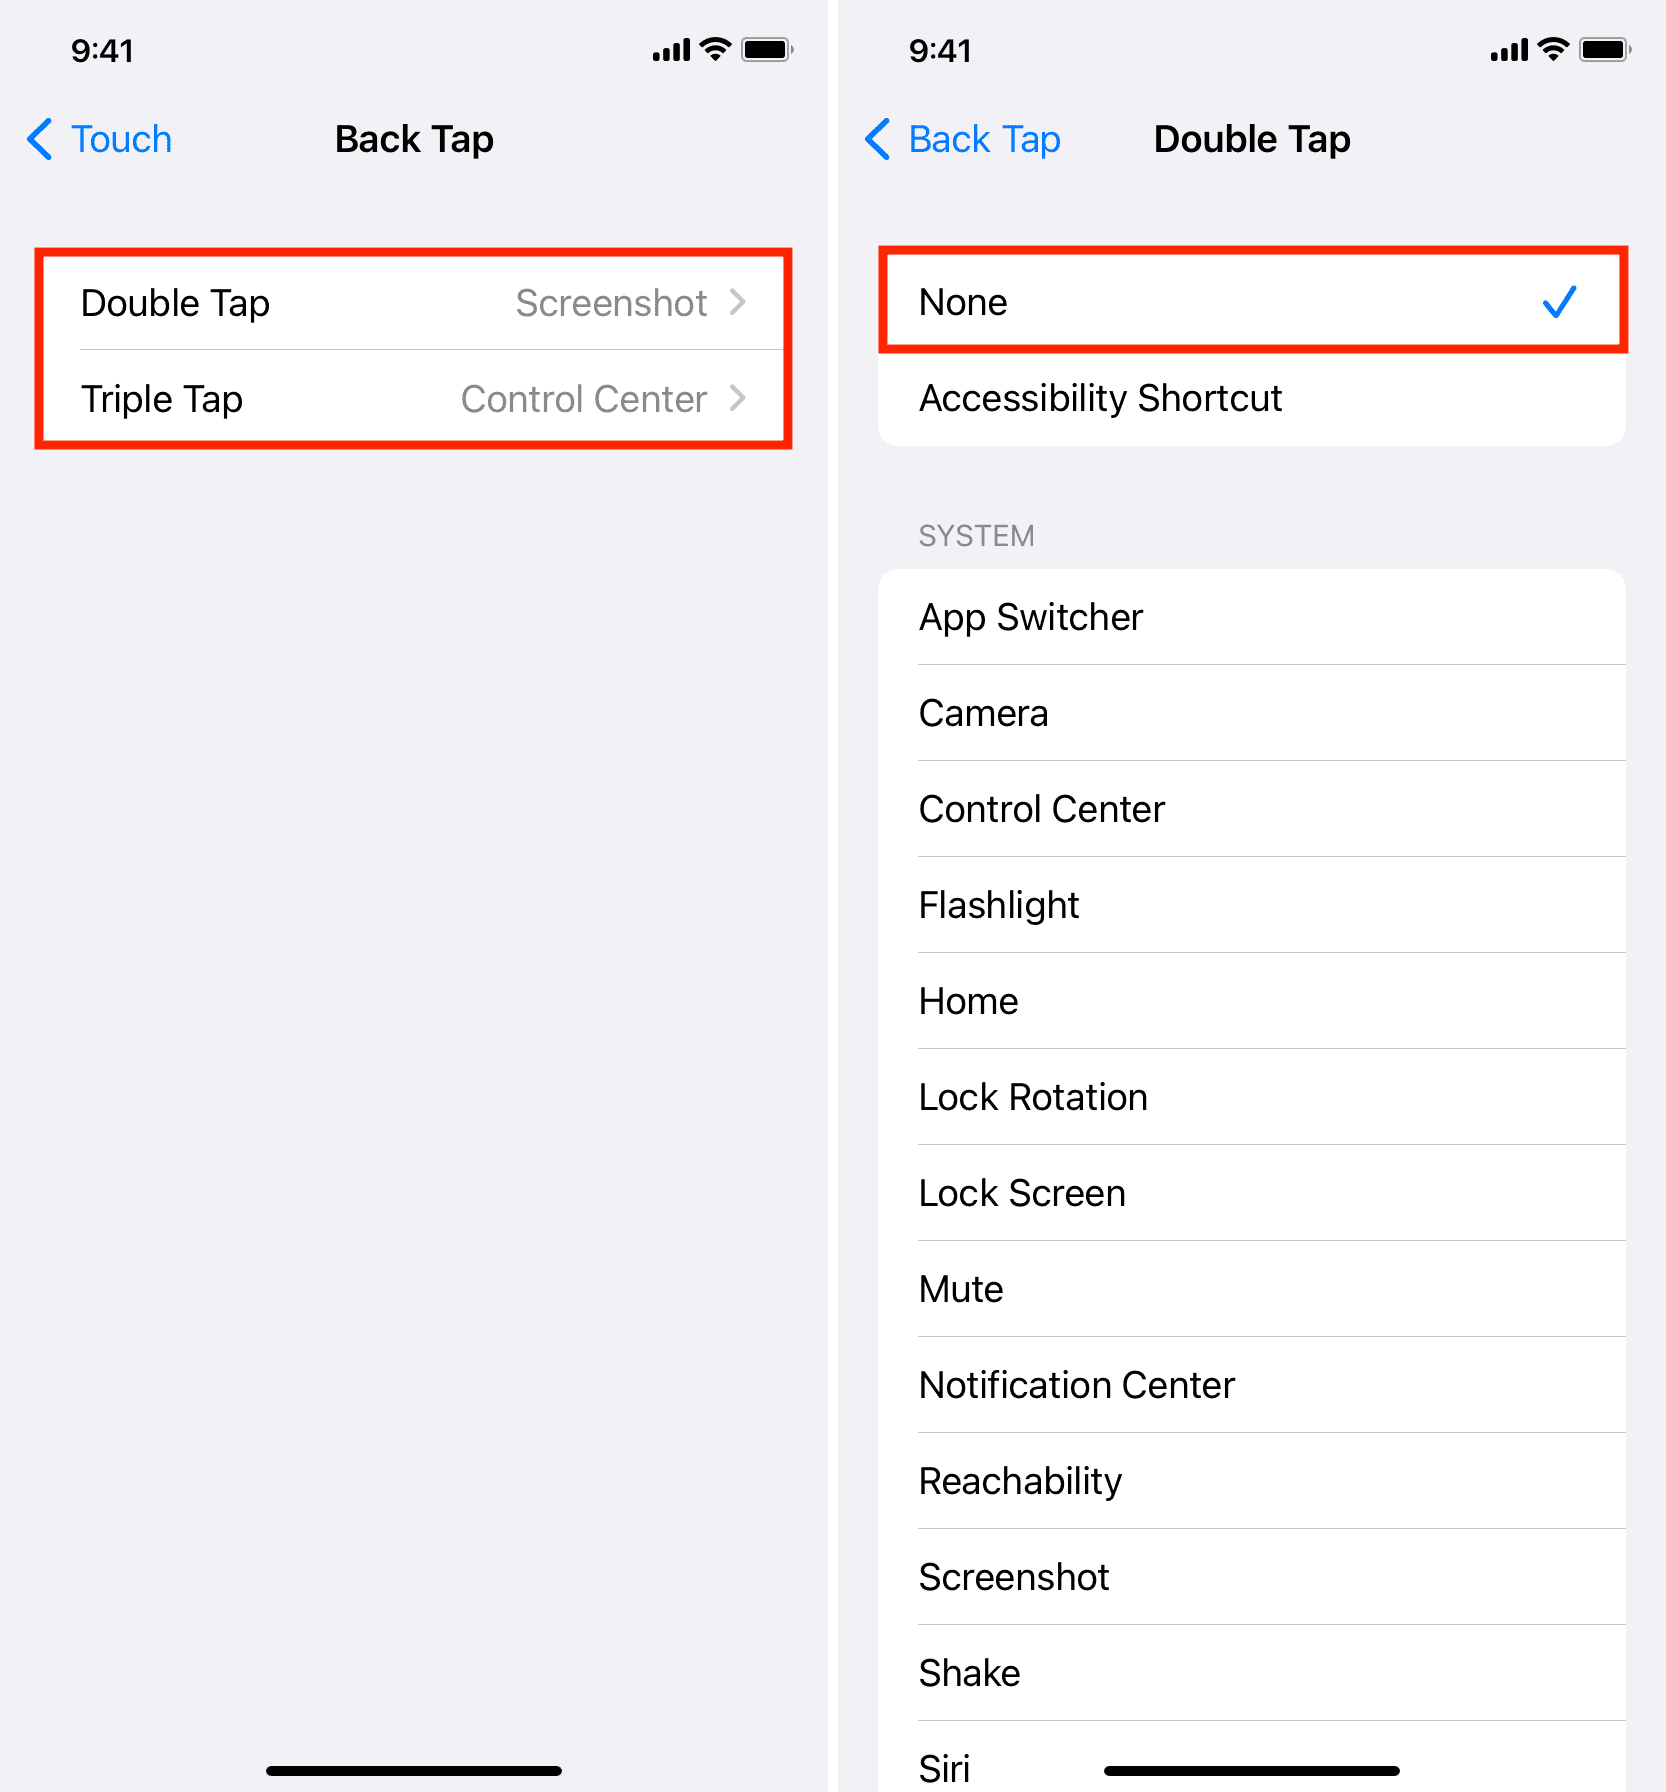 Disable Back Tap on iPhone